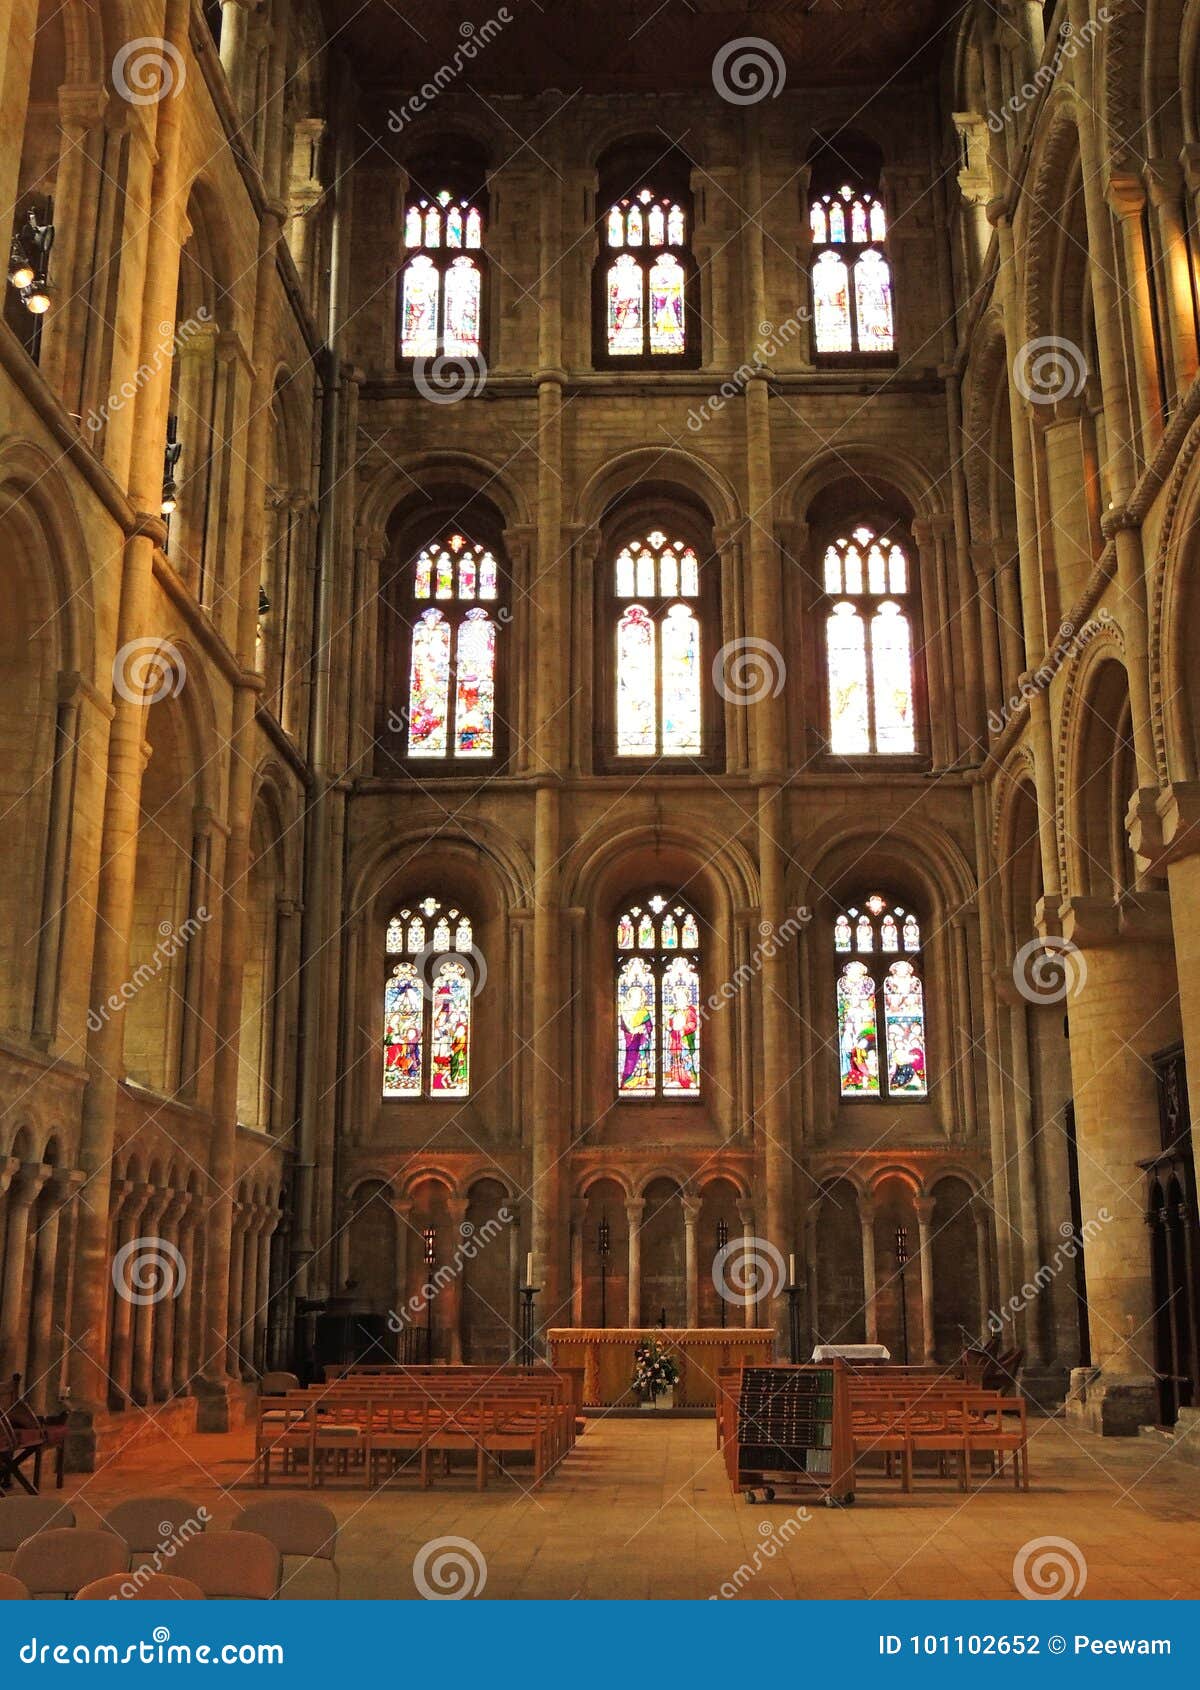 north transept of peterborough cathedral, uk 